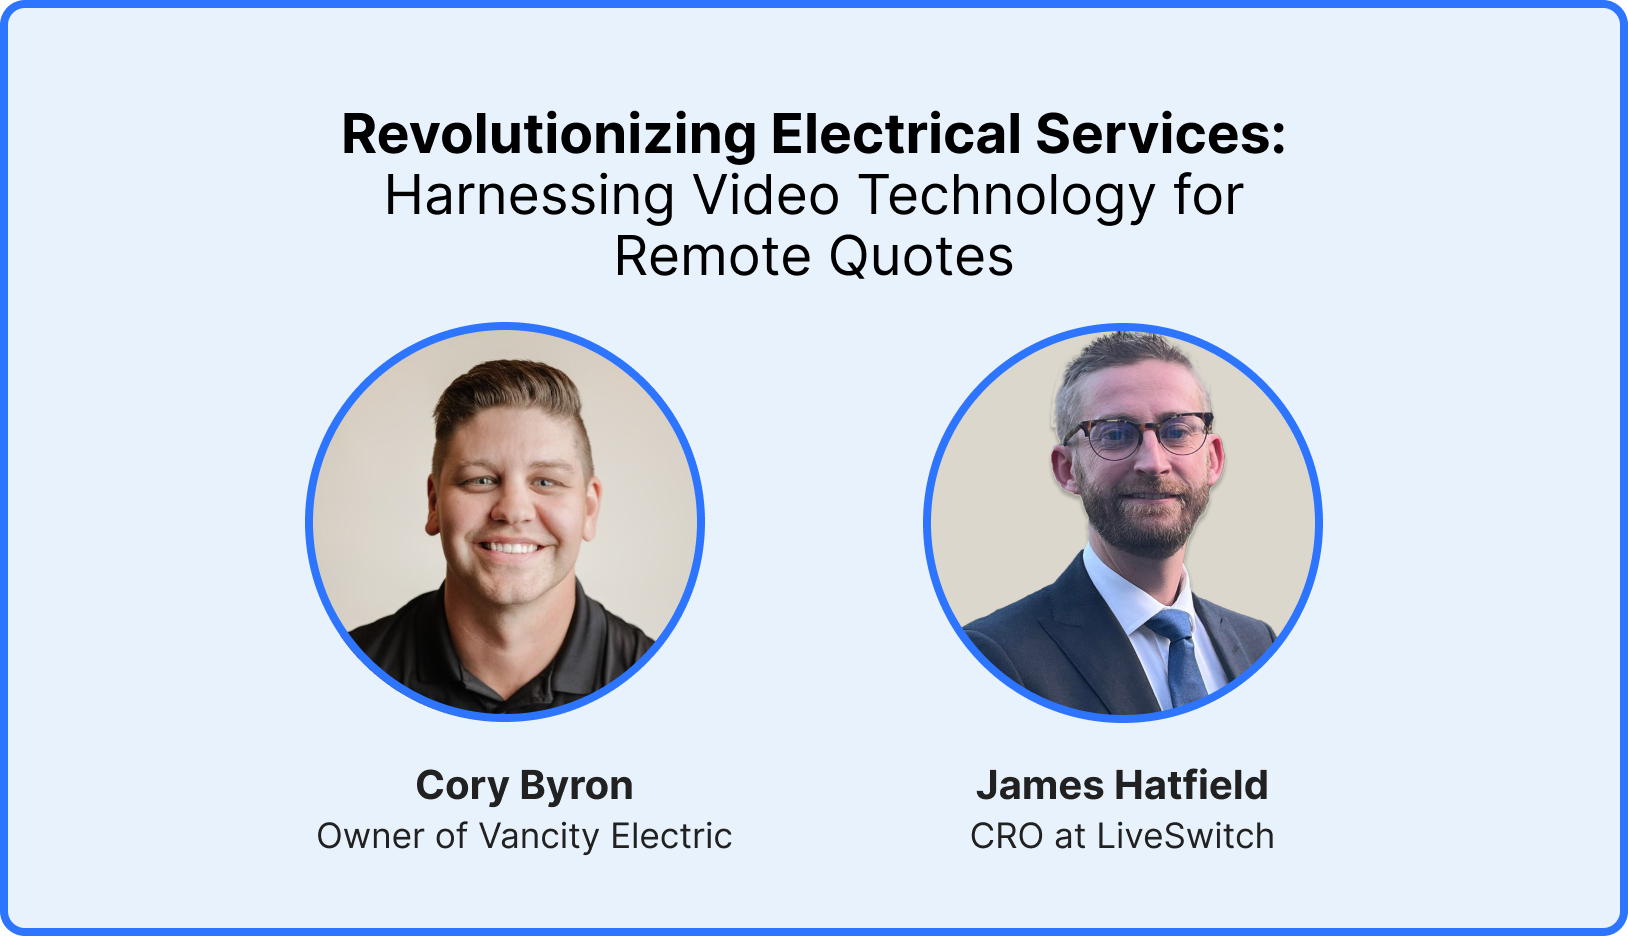 Upcoming Webinar: Revolutionizing Electrical Services Harnessing Video Technology for Remote Quotes